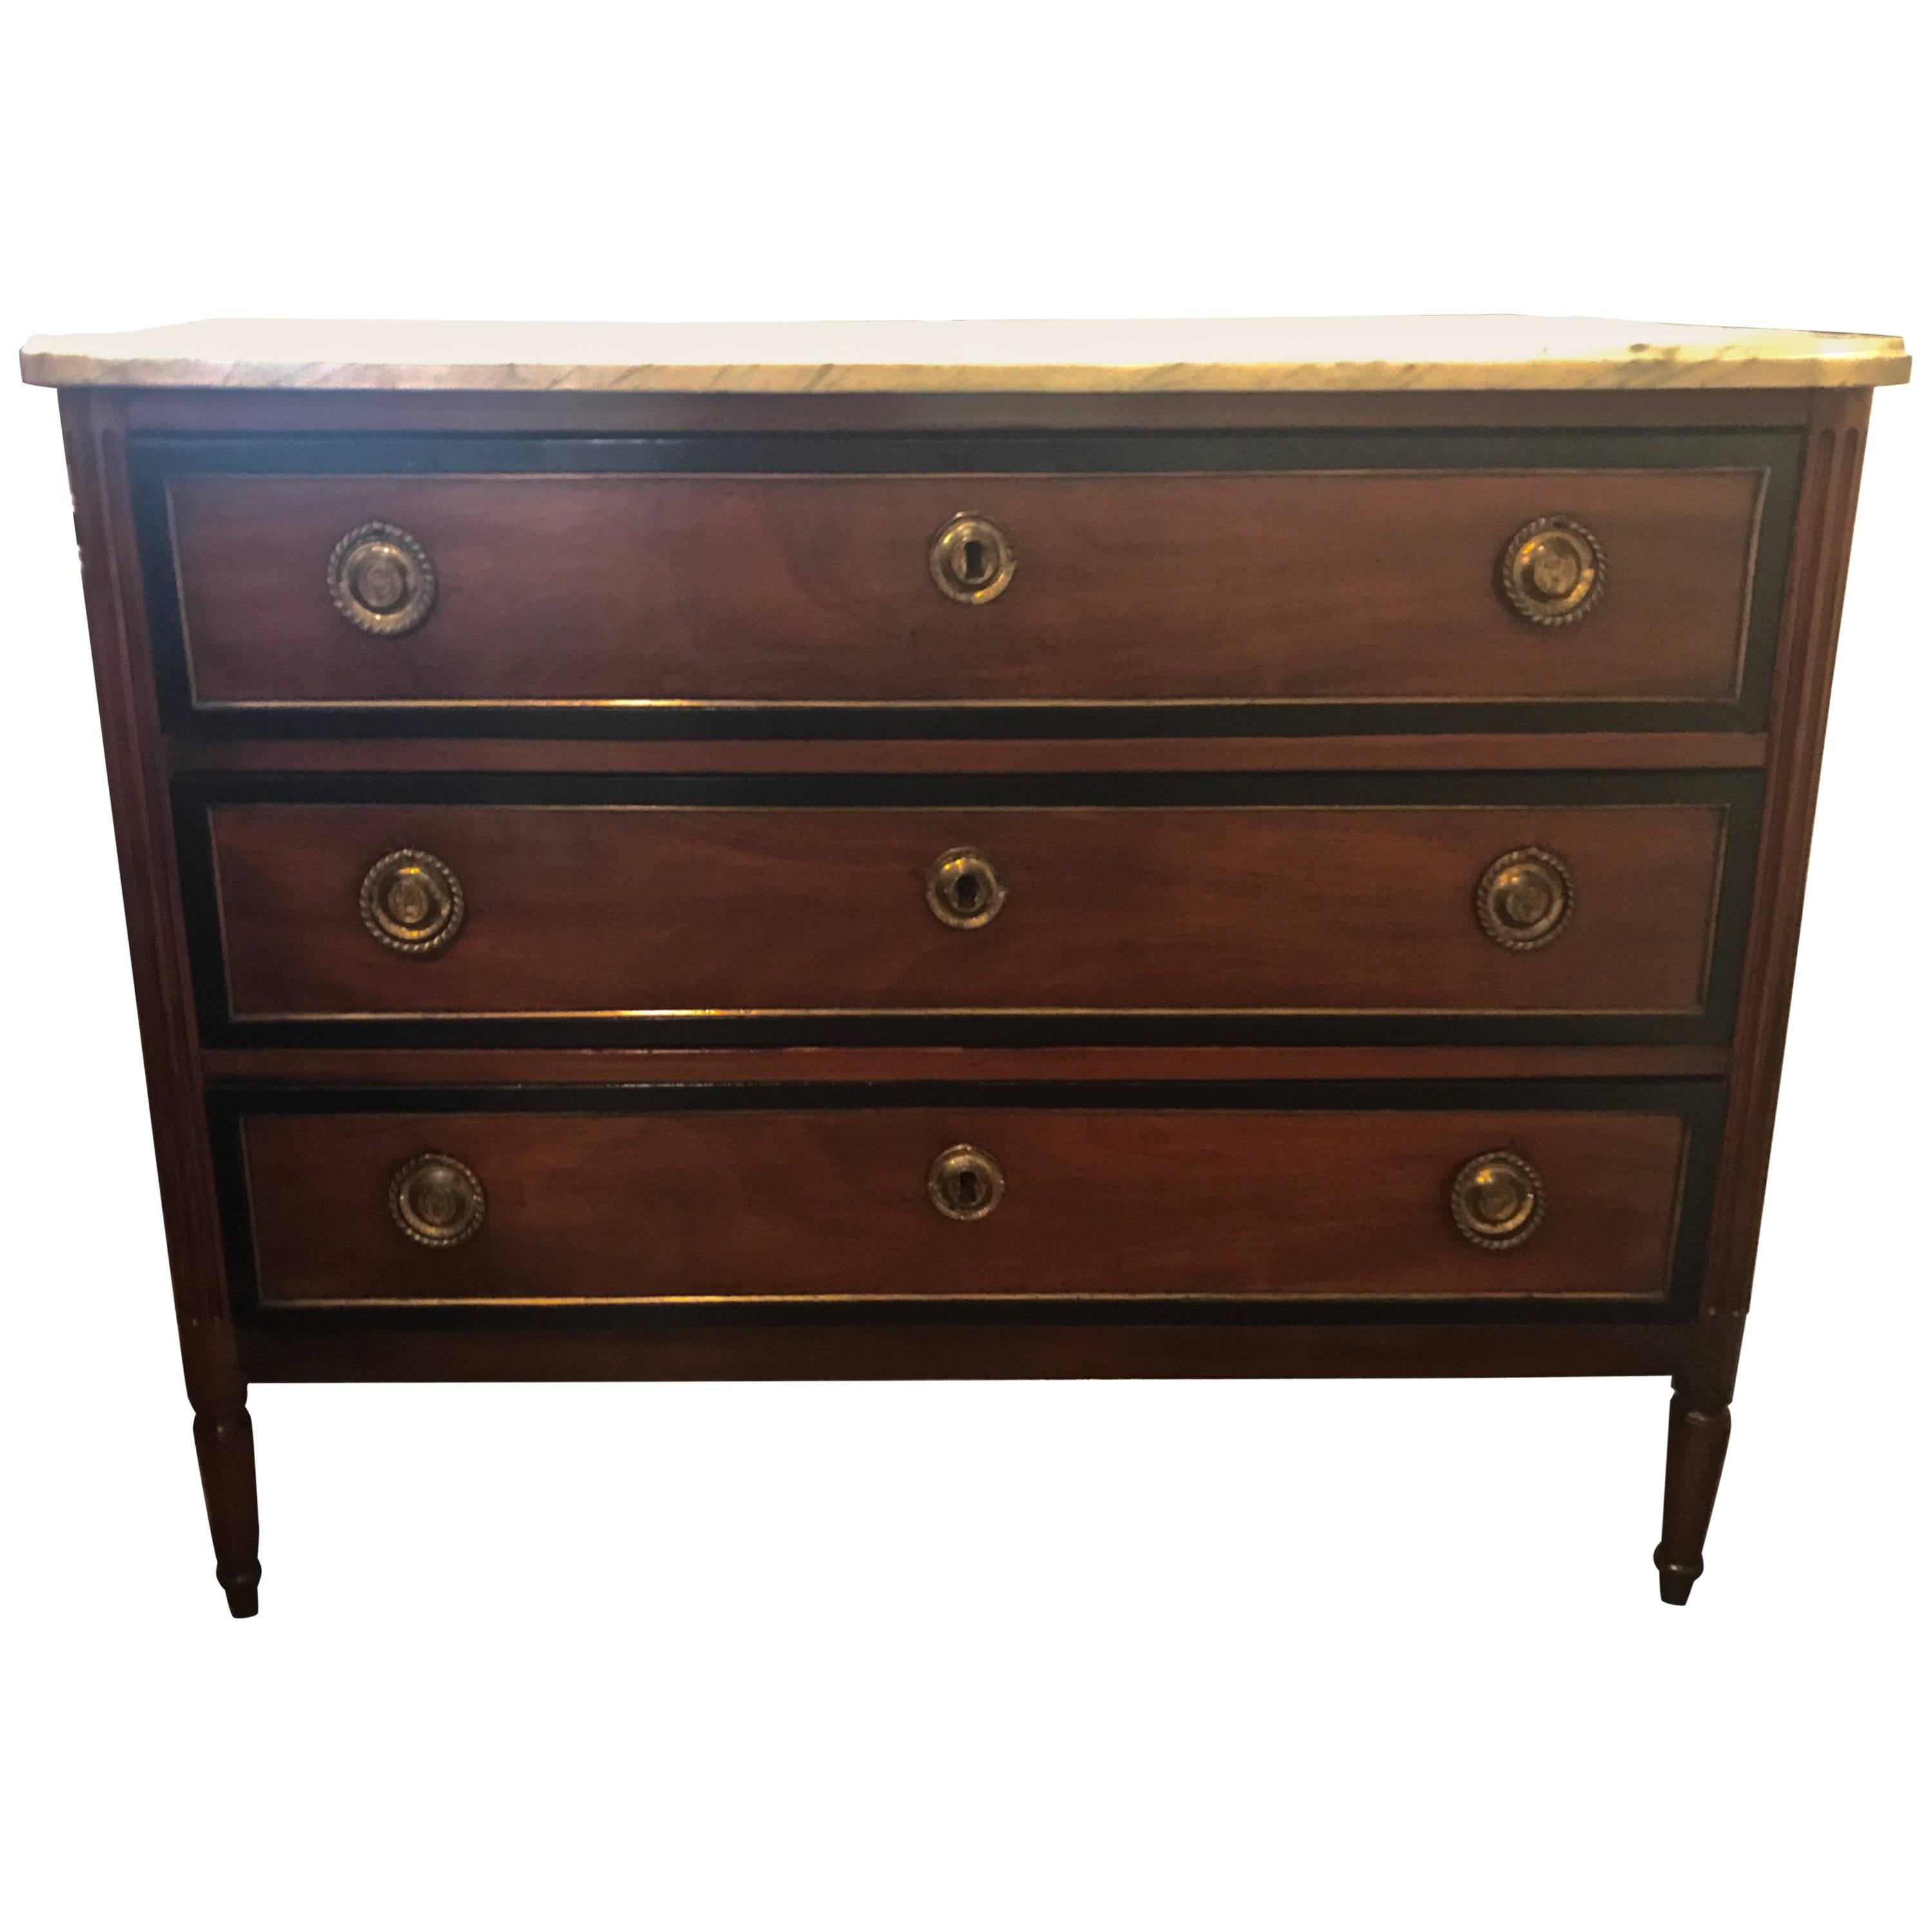 19th Century French Regency Style Marble-Top Commode For Sale